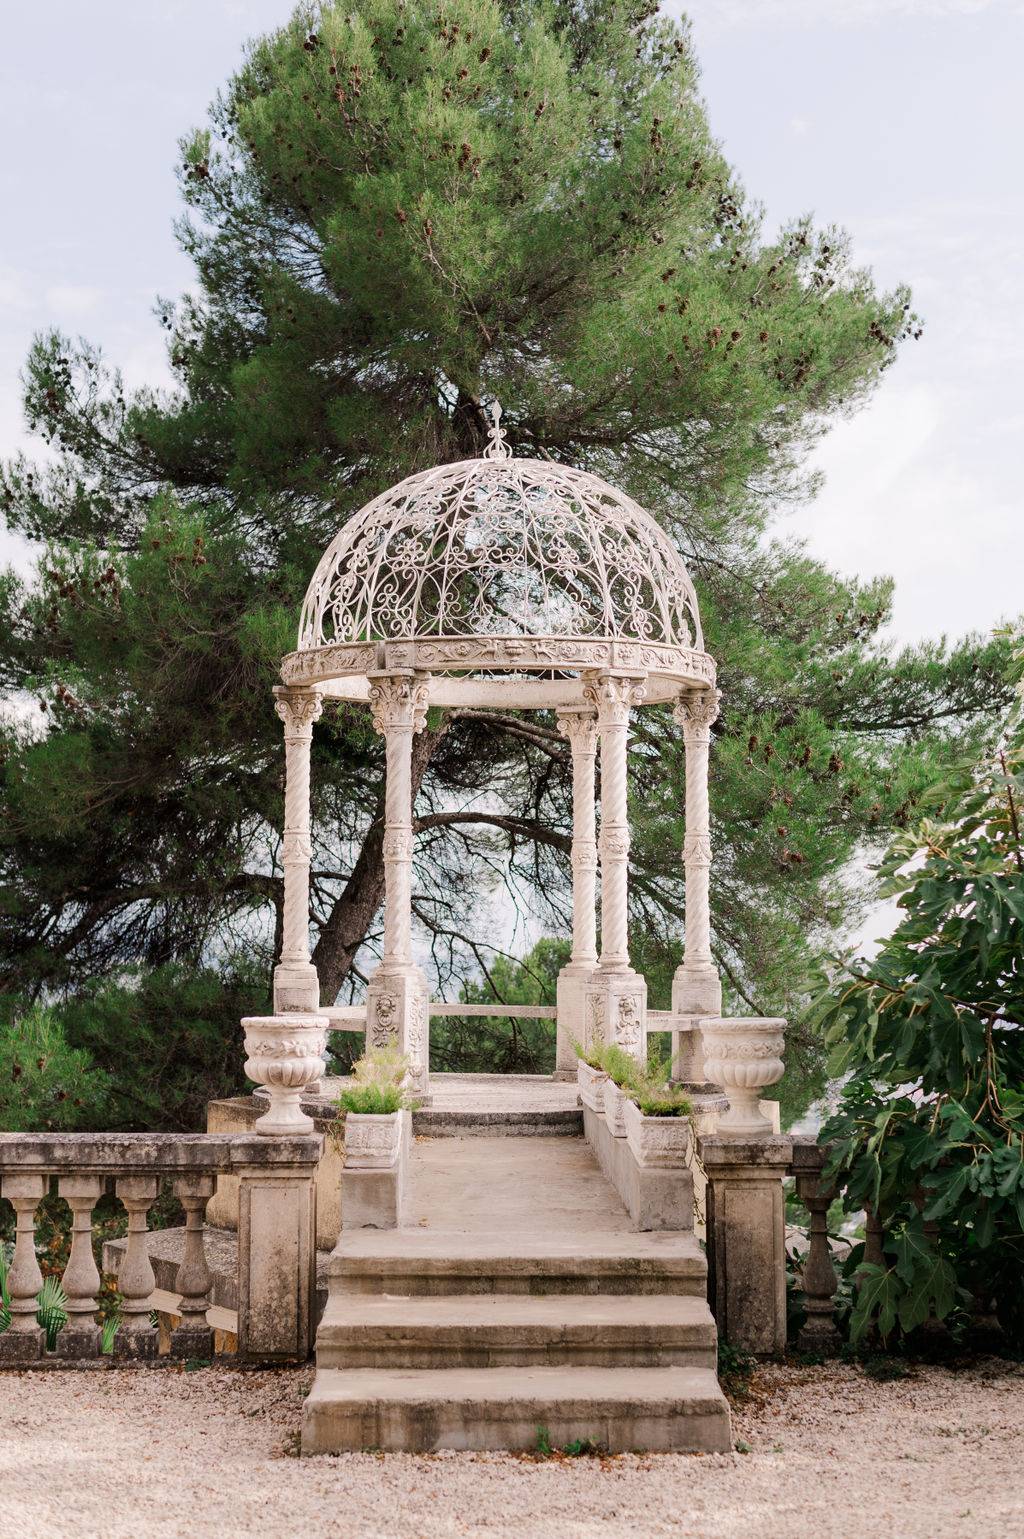 Destination Wedding With Luxury Florals At Chateau Saint Georges